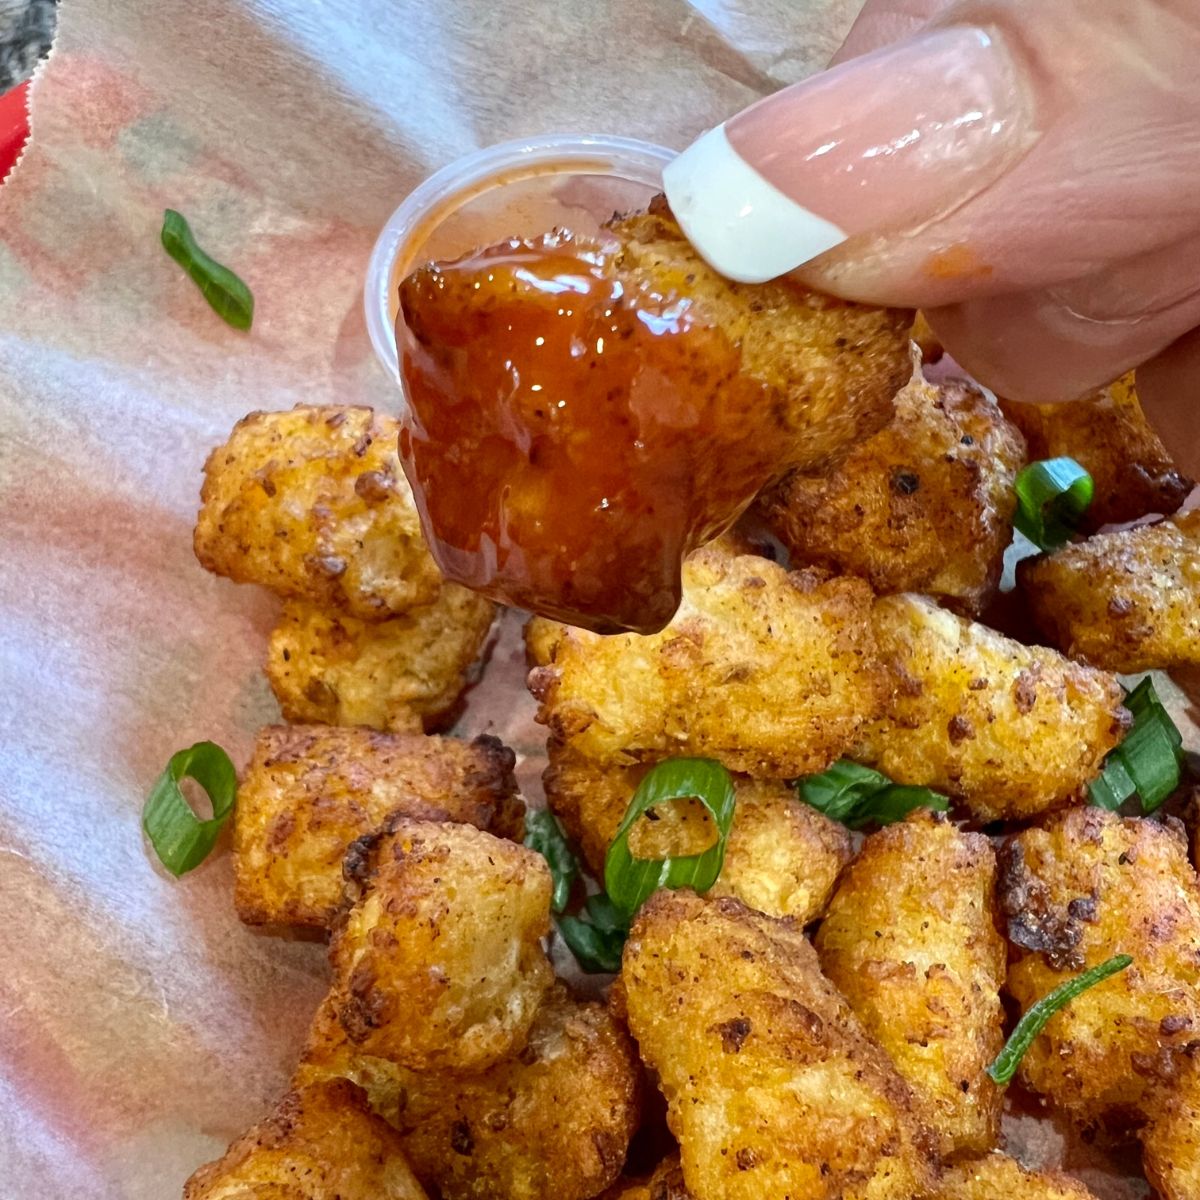 A hand holding an air fried tater tot dipped in hot sauce